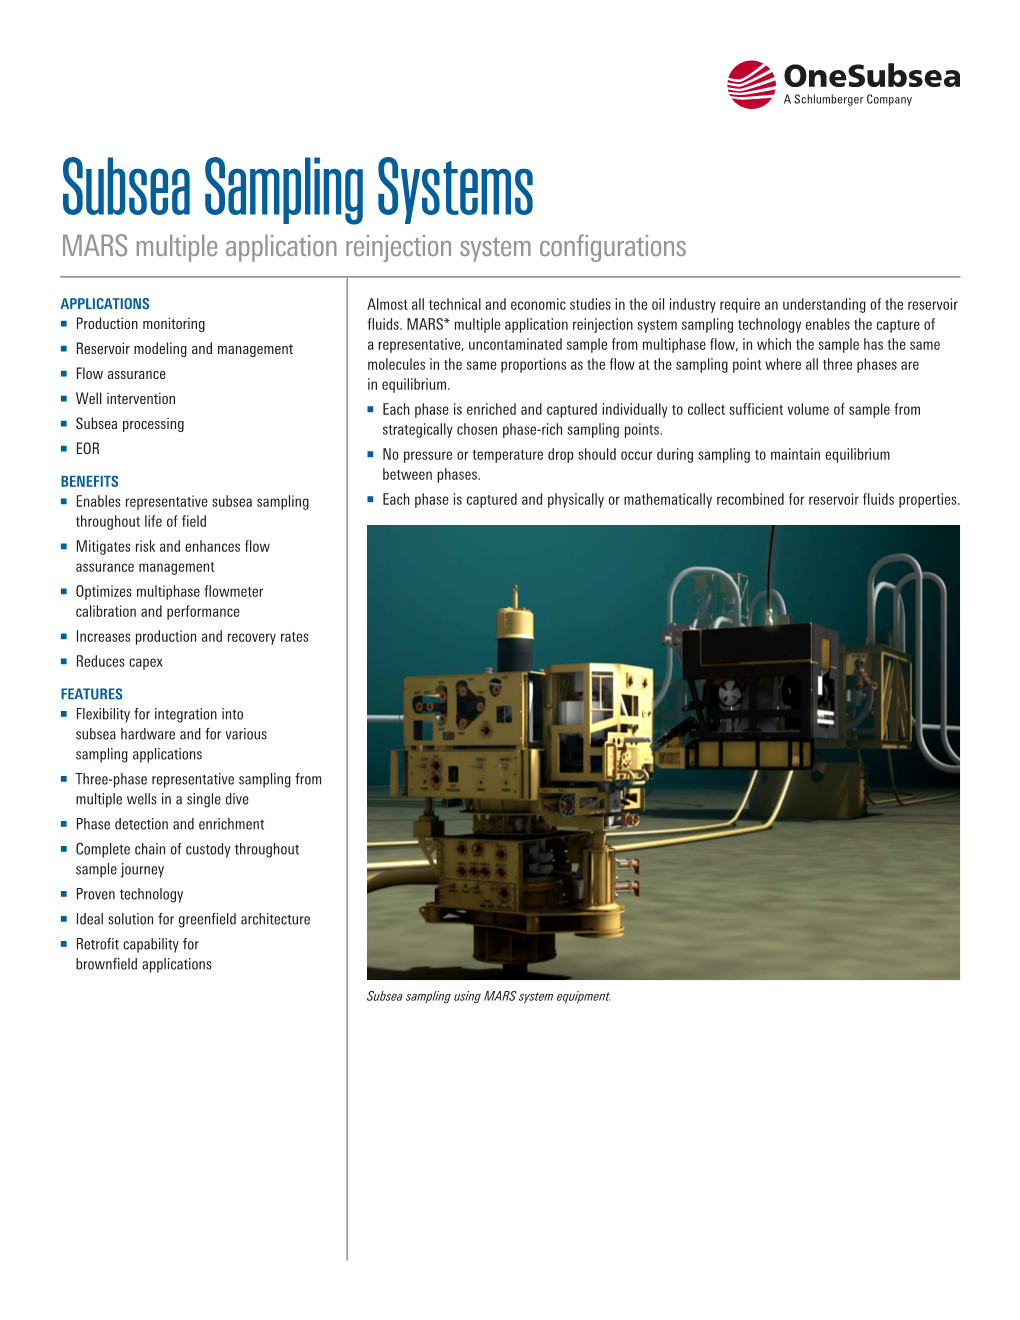 Subsea Sampling Systems MARS Multiple Application Reinjection System Configurations